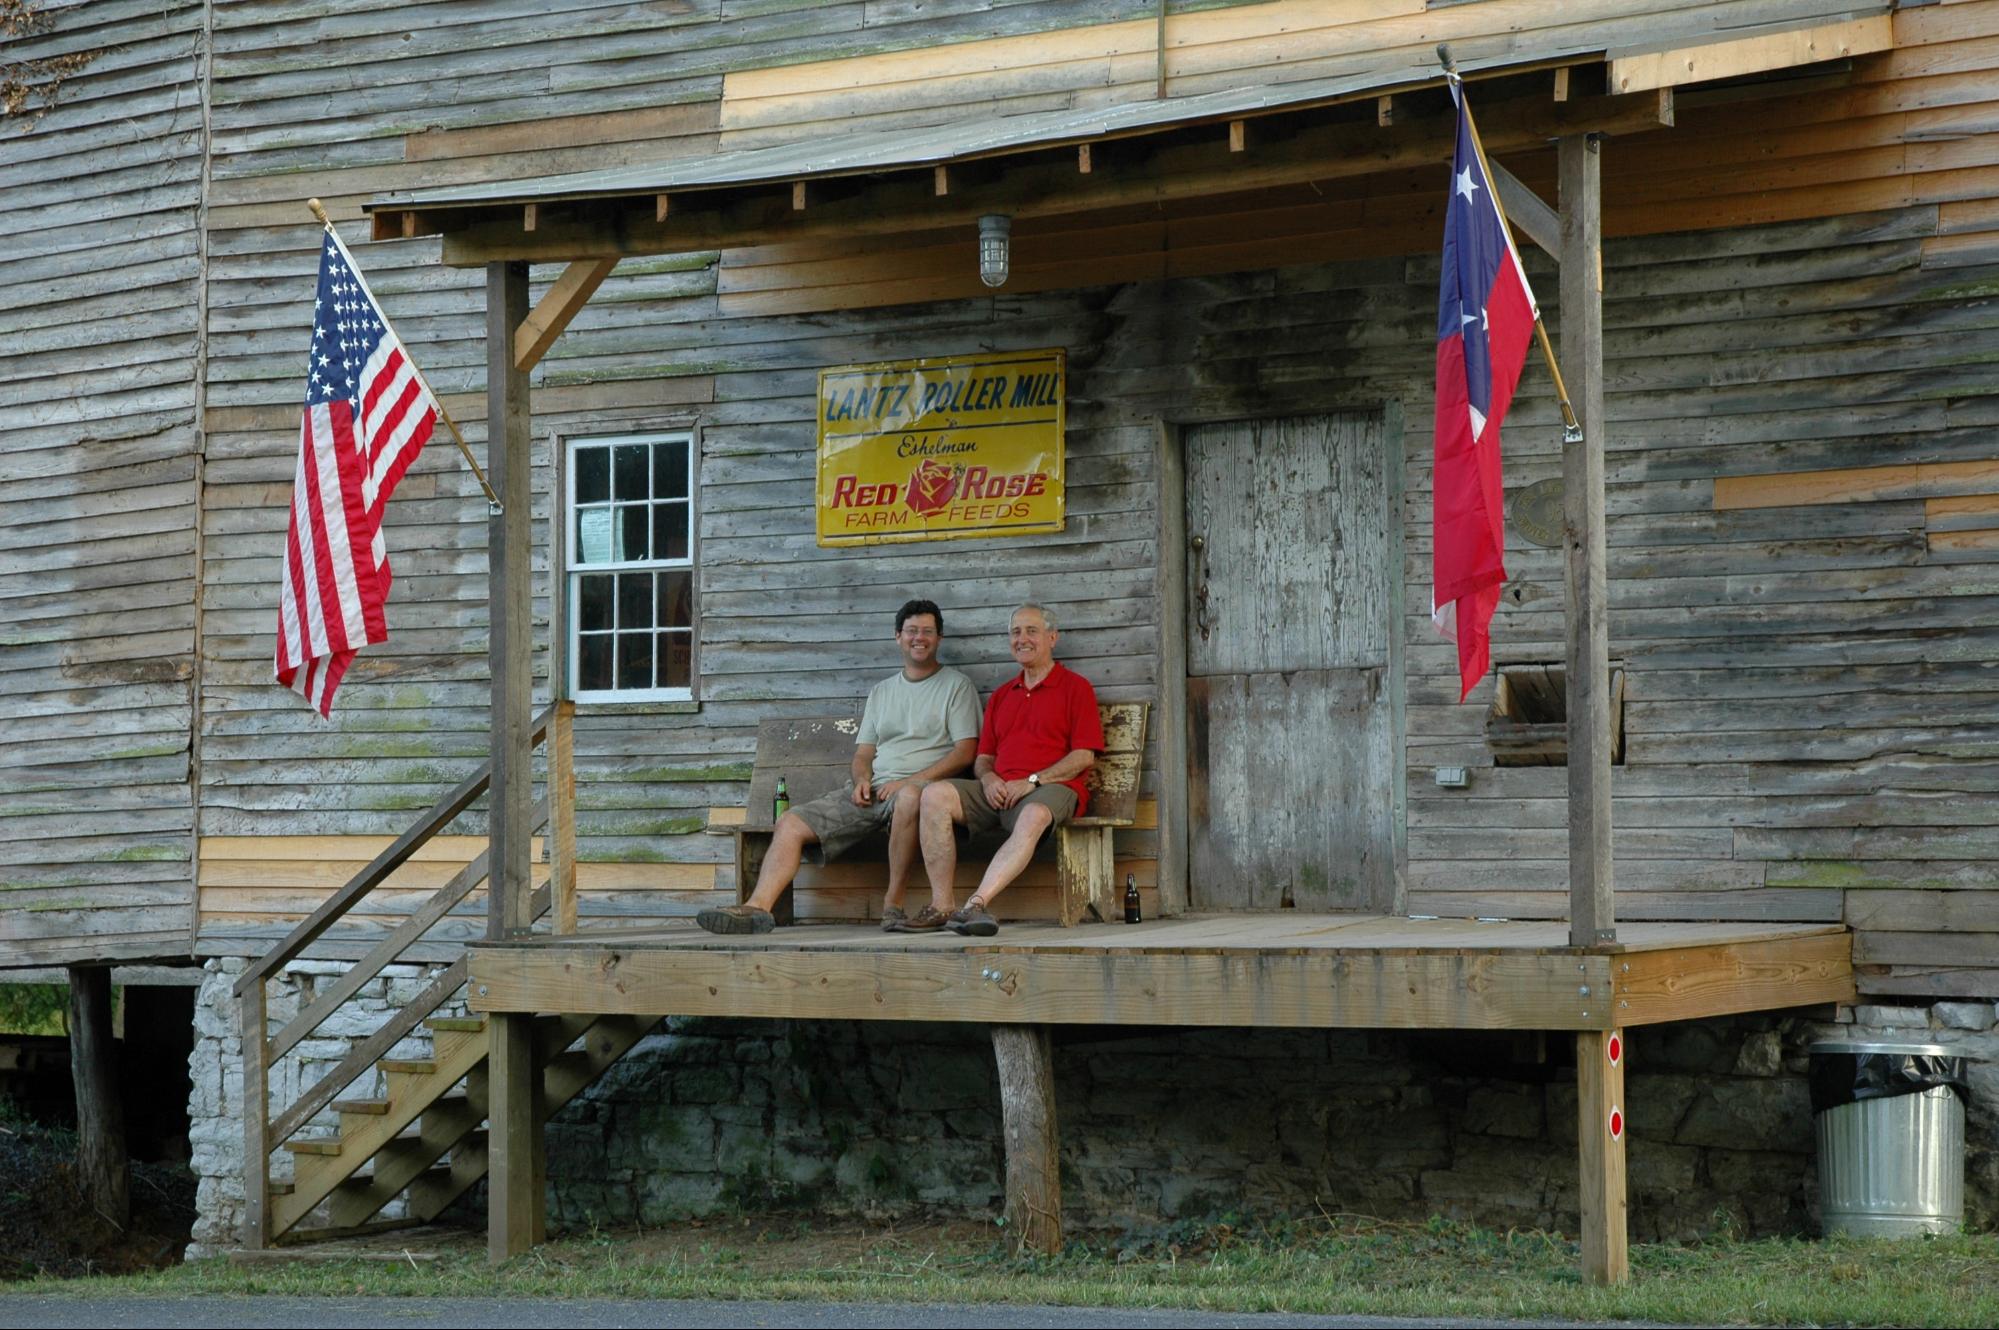 The owner and his father on the front loading dock, September 2, 2008